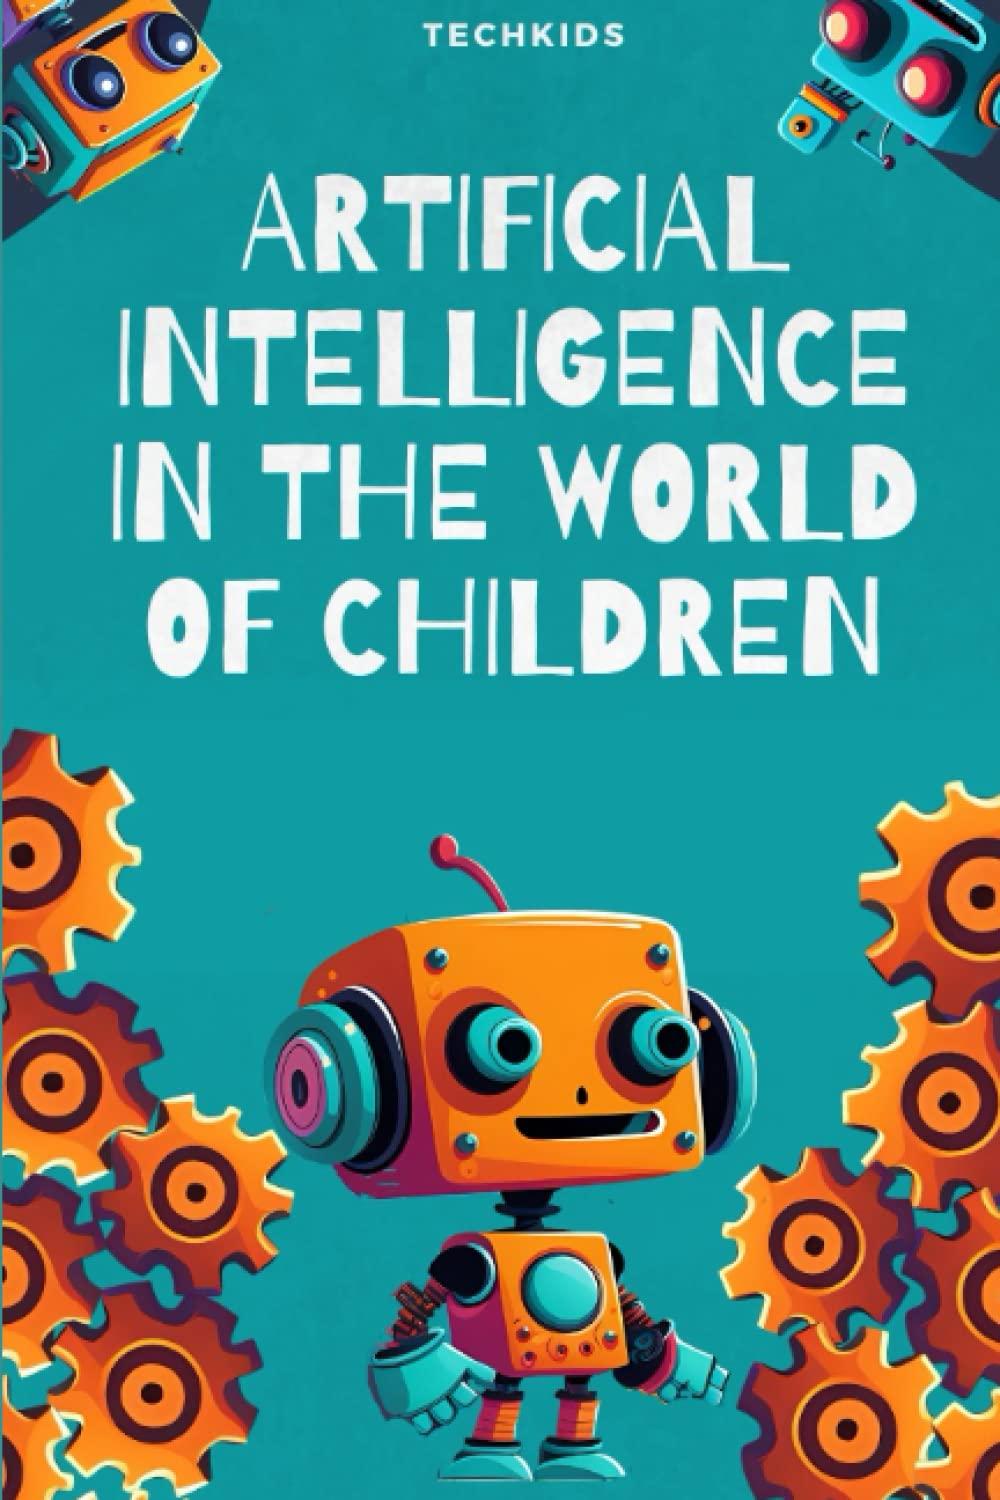 artificial intelligence in the world of children 1st edition techkids b0c5pcvpc5, 979-8395371362